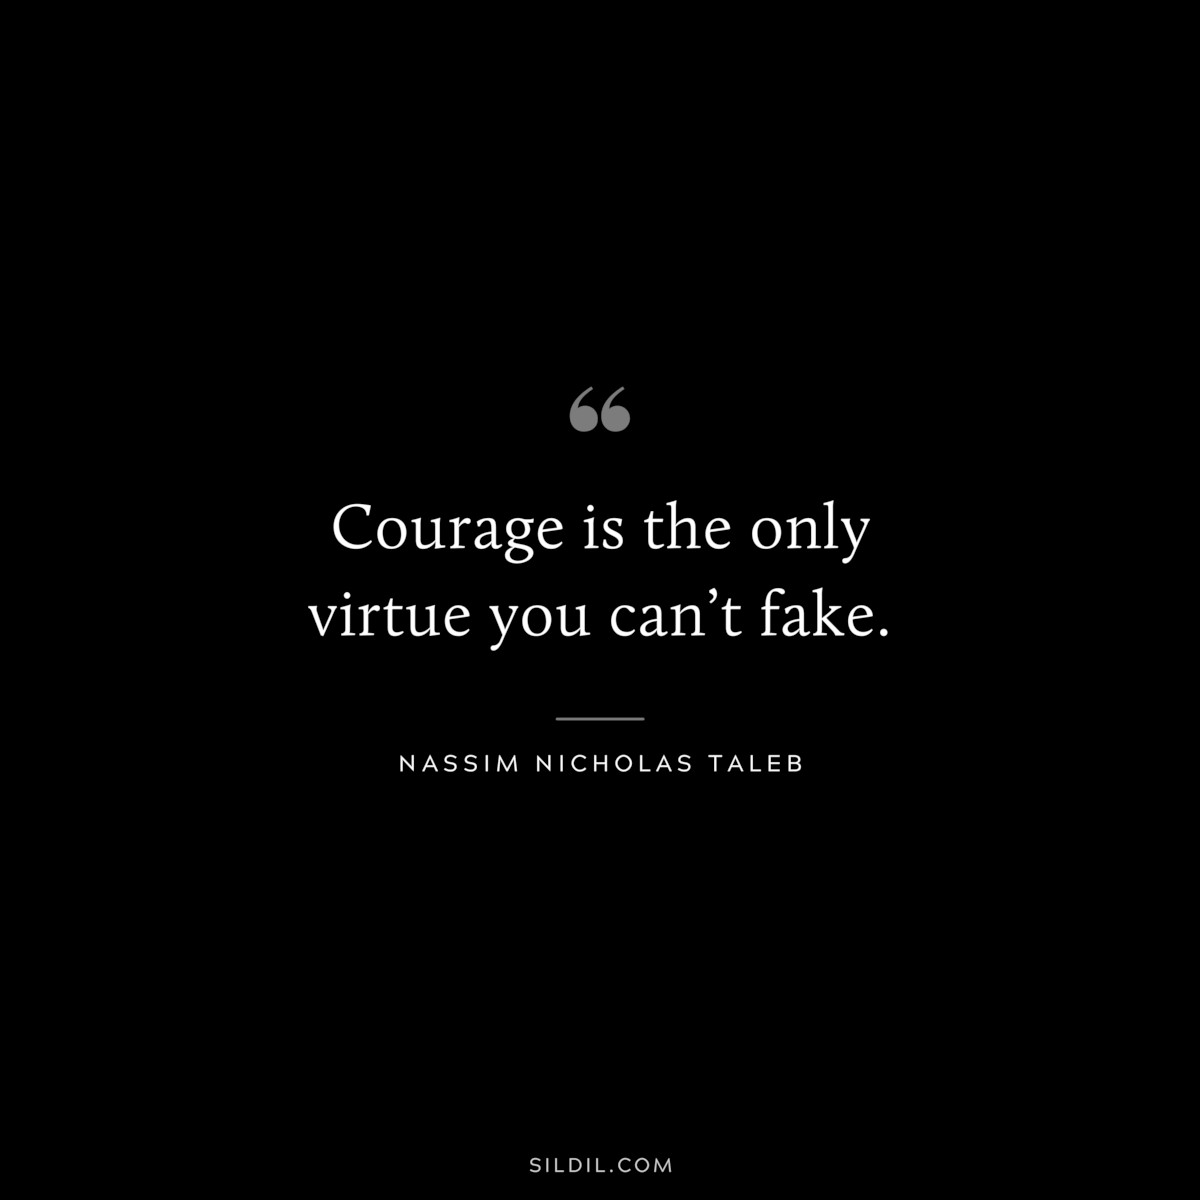 Courage is the only virtue you can’t fake. ― Nassim Nicholas Taleb